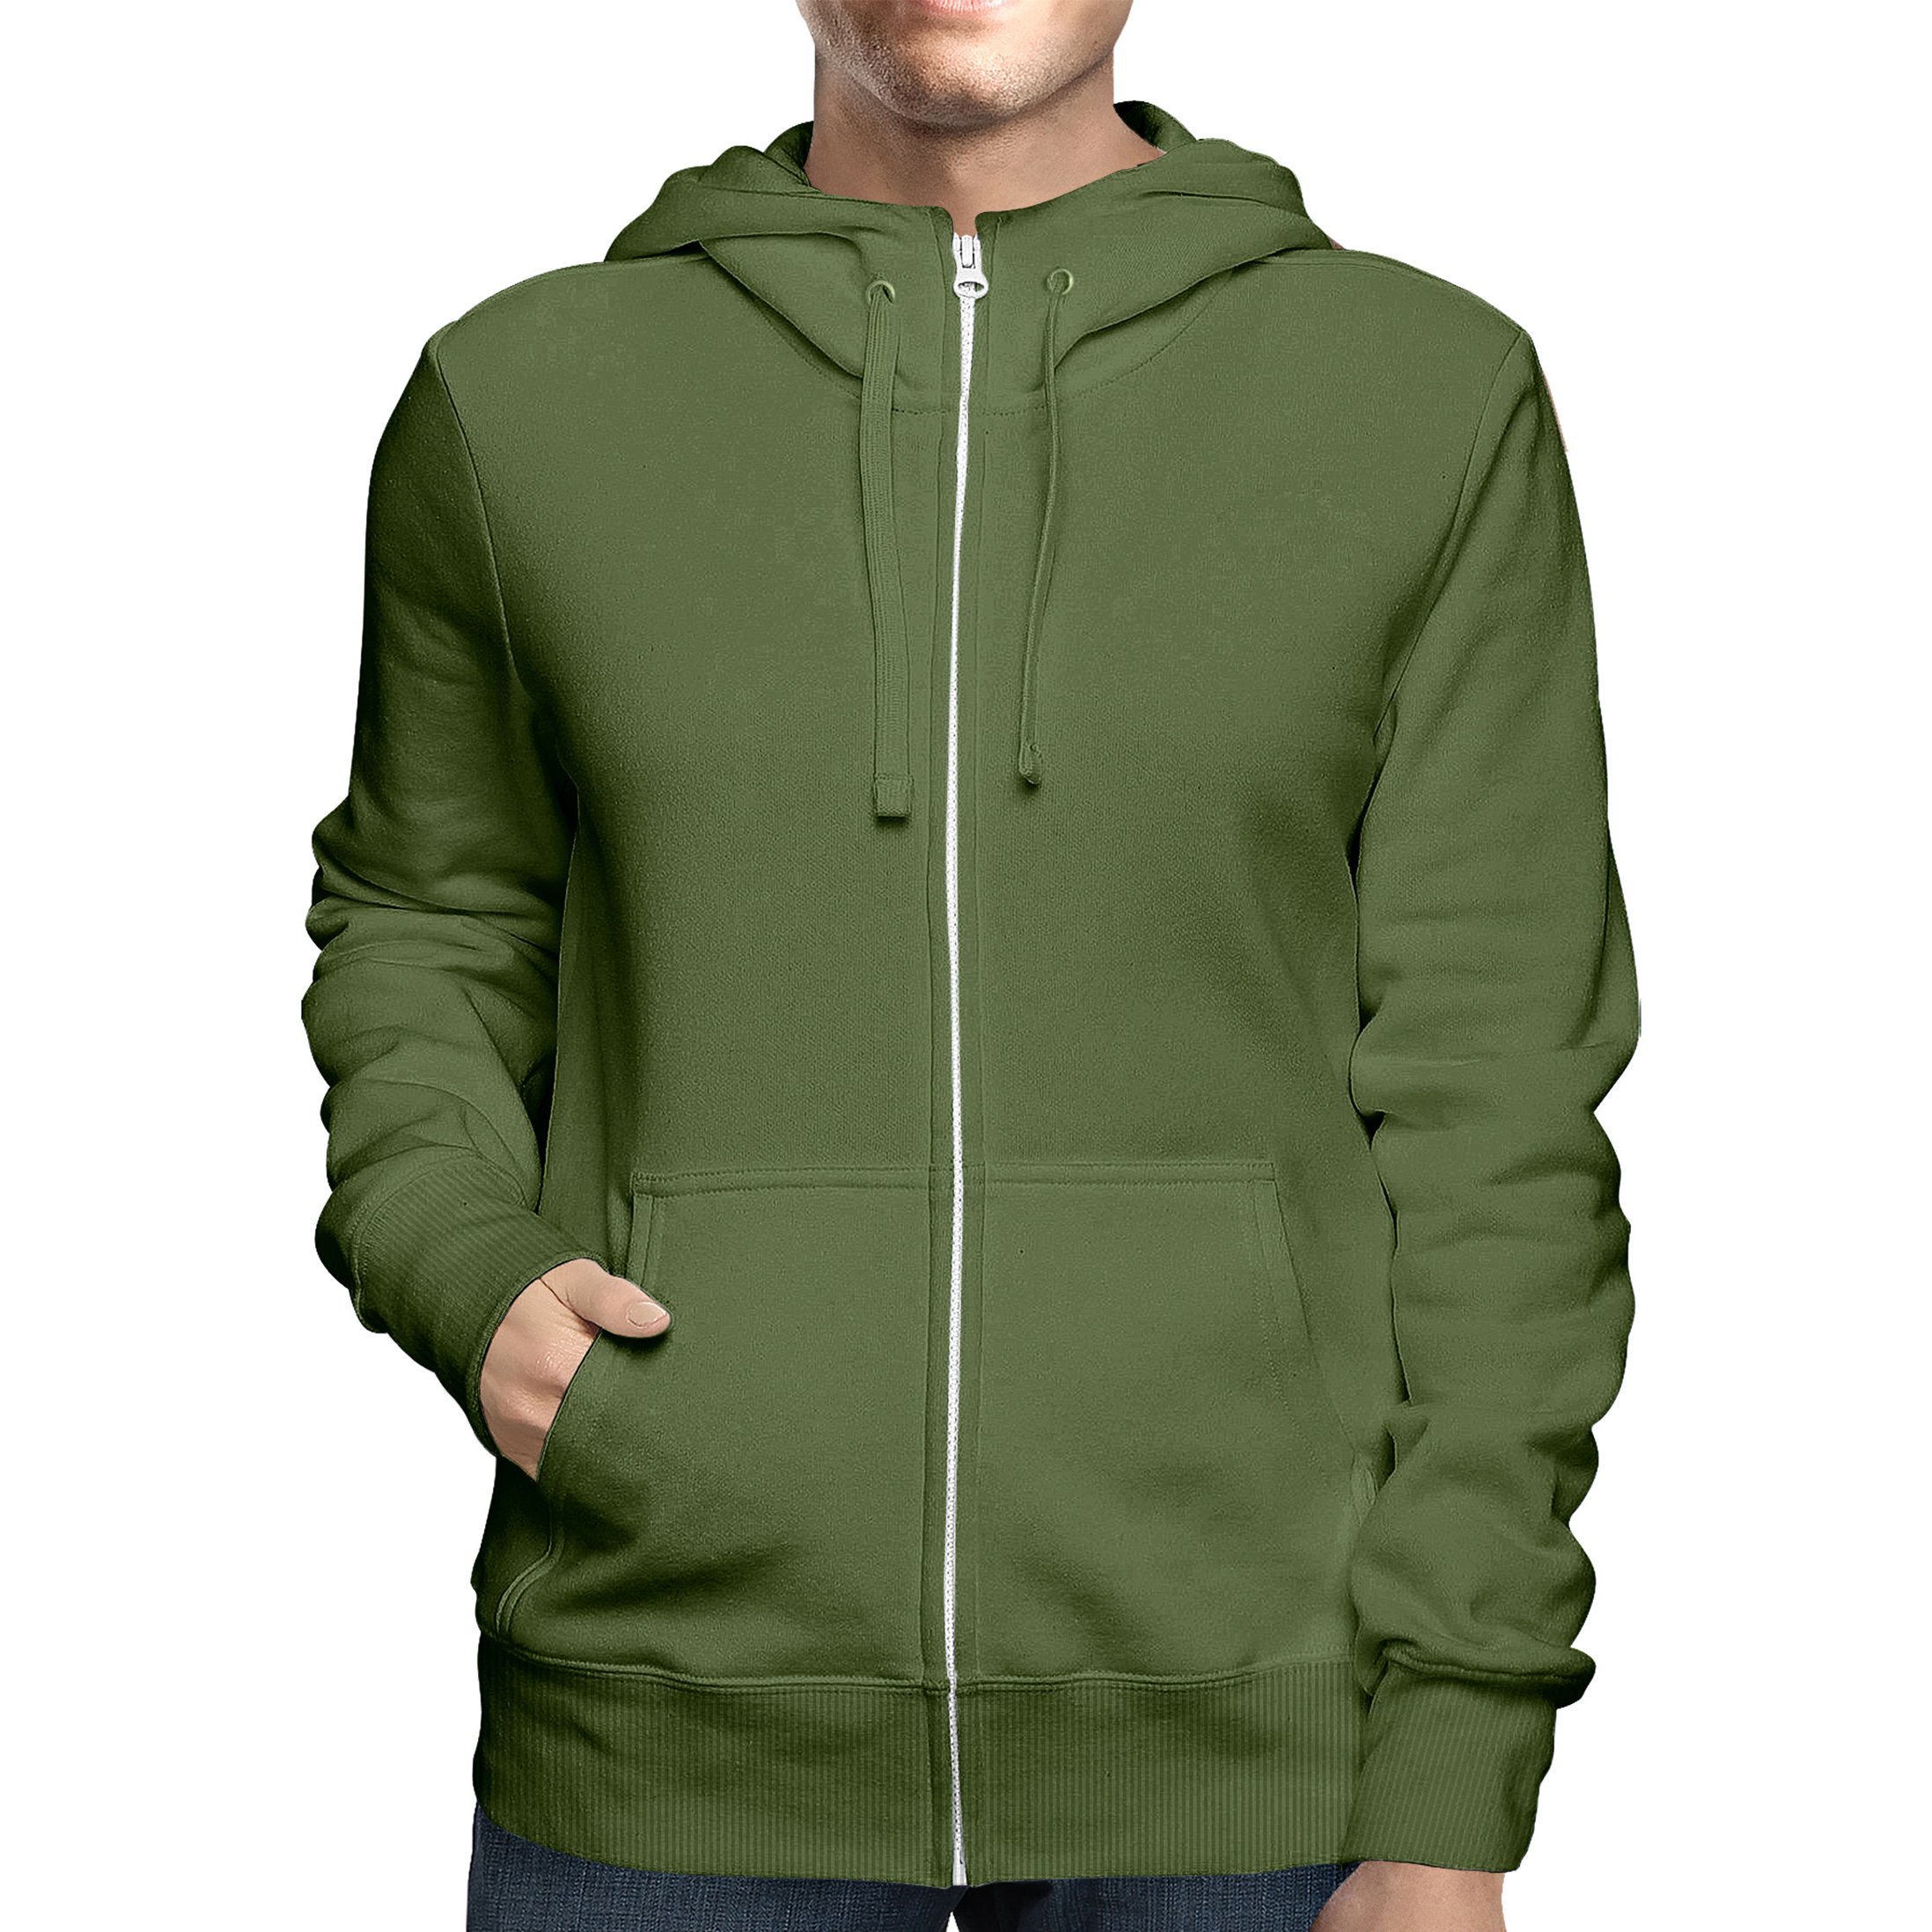 2-Pack: Men's Full Zip Up Fleece-Lined Hoodie Sweatshirt (Big & Tall Size Available) - Olive, Small